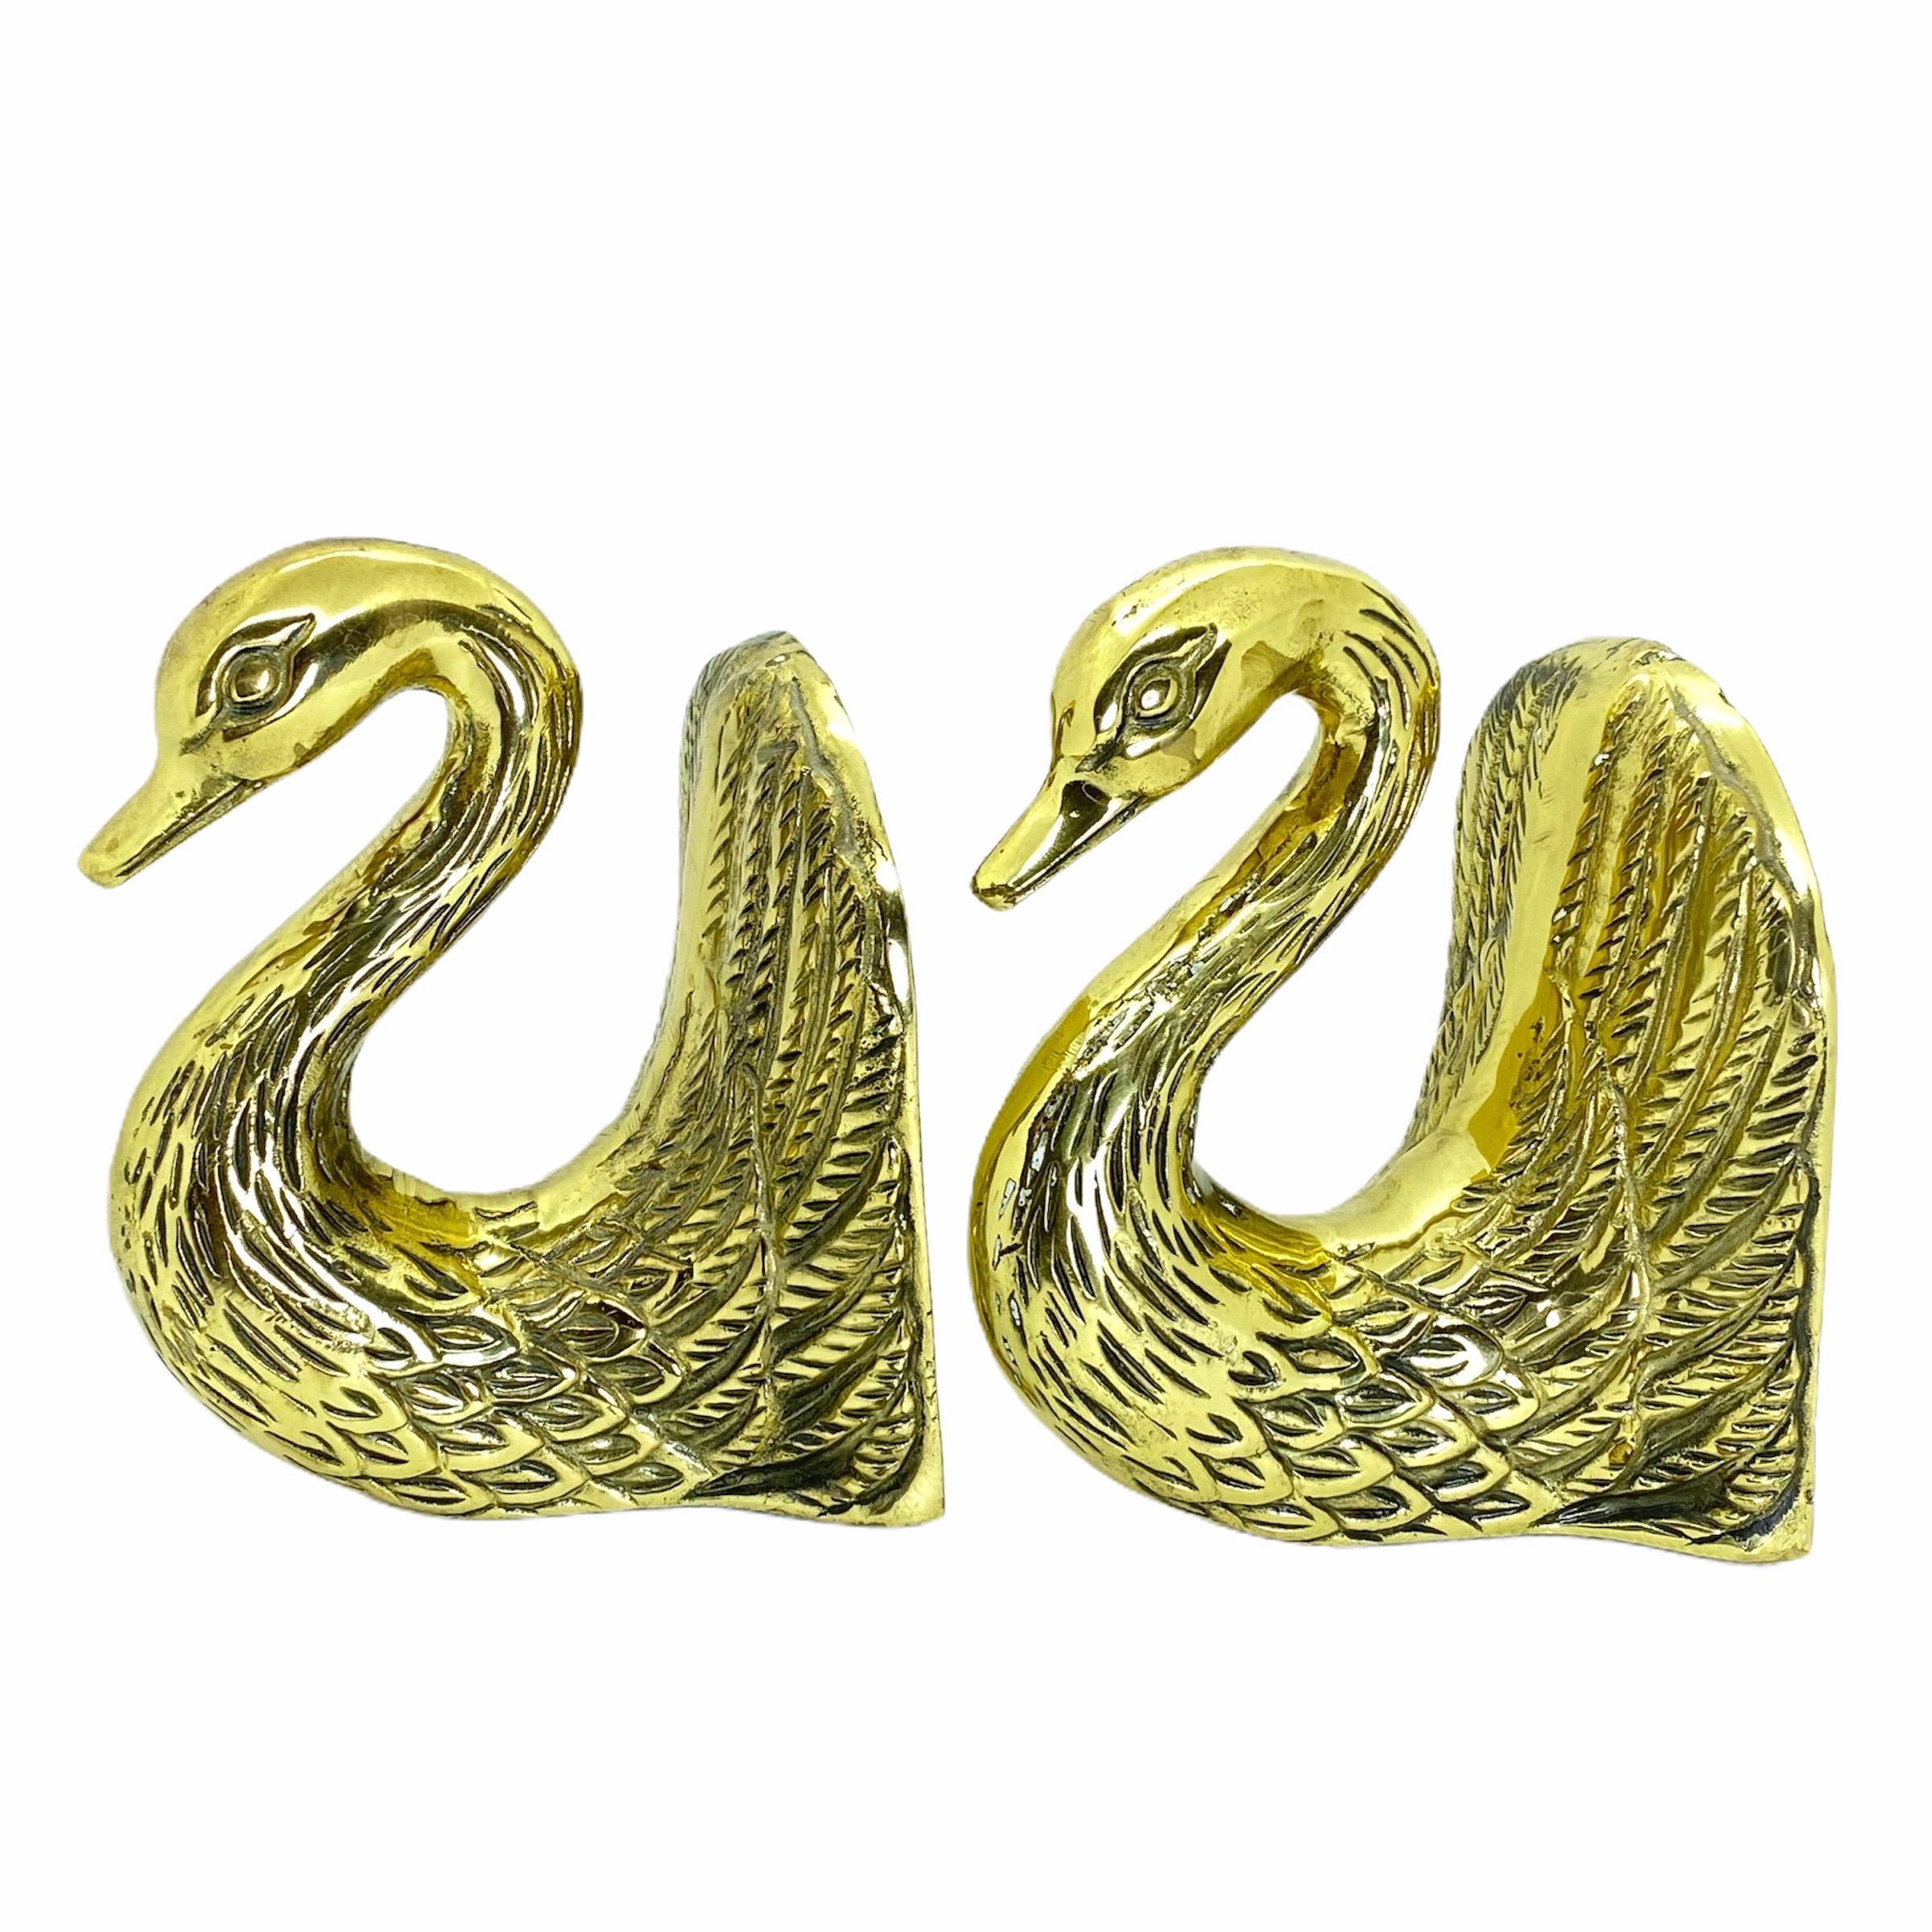 Brass Swan  vintage  Brass Swan Figurines Bird Crafted with Genuine Brass Age Lovely Patina